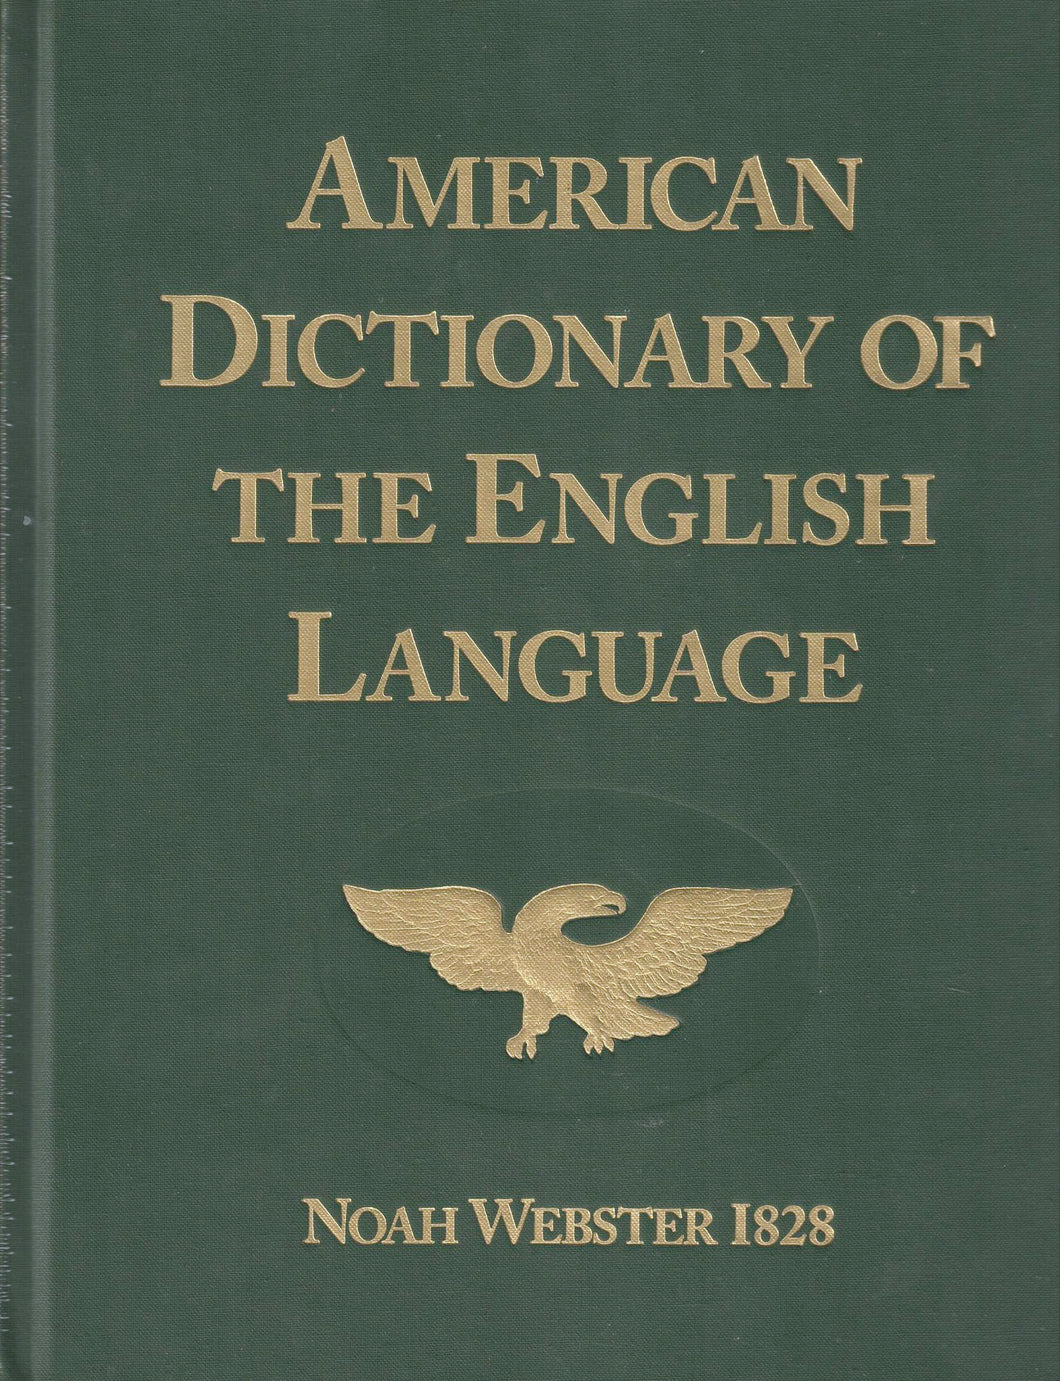 American Dictionary of the English Language Noah Webster 1828